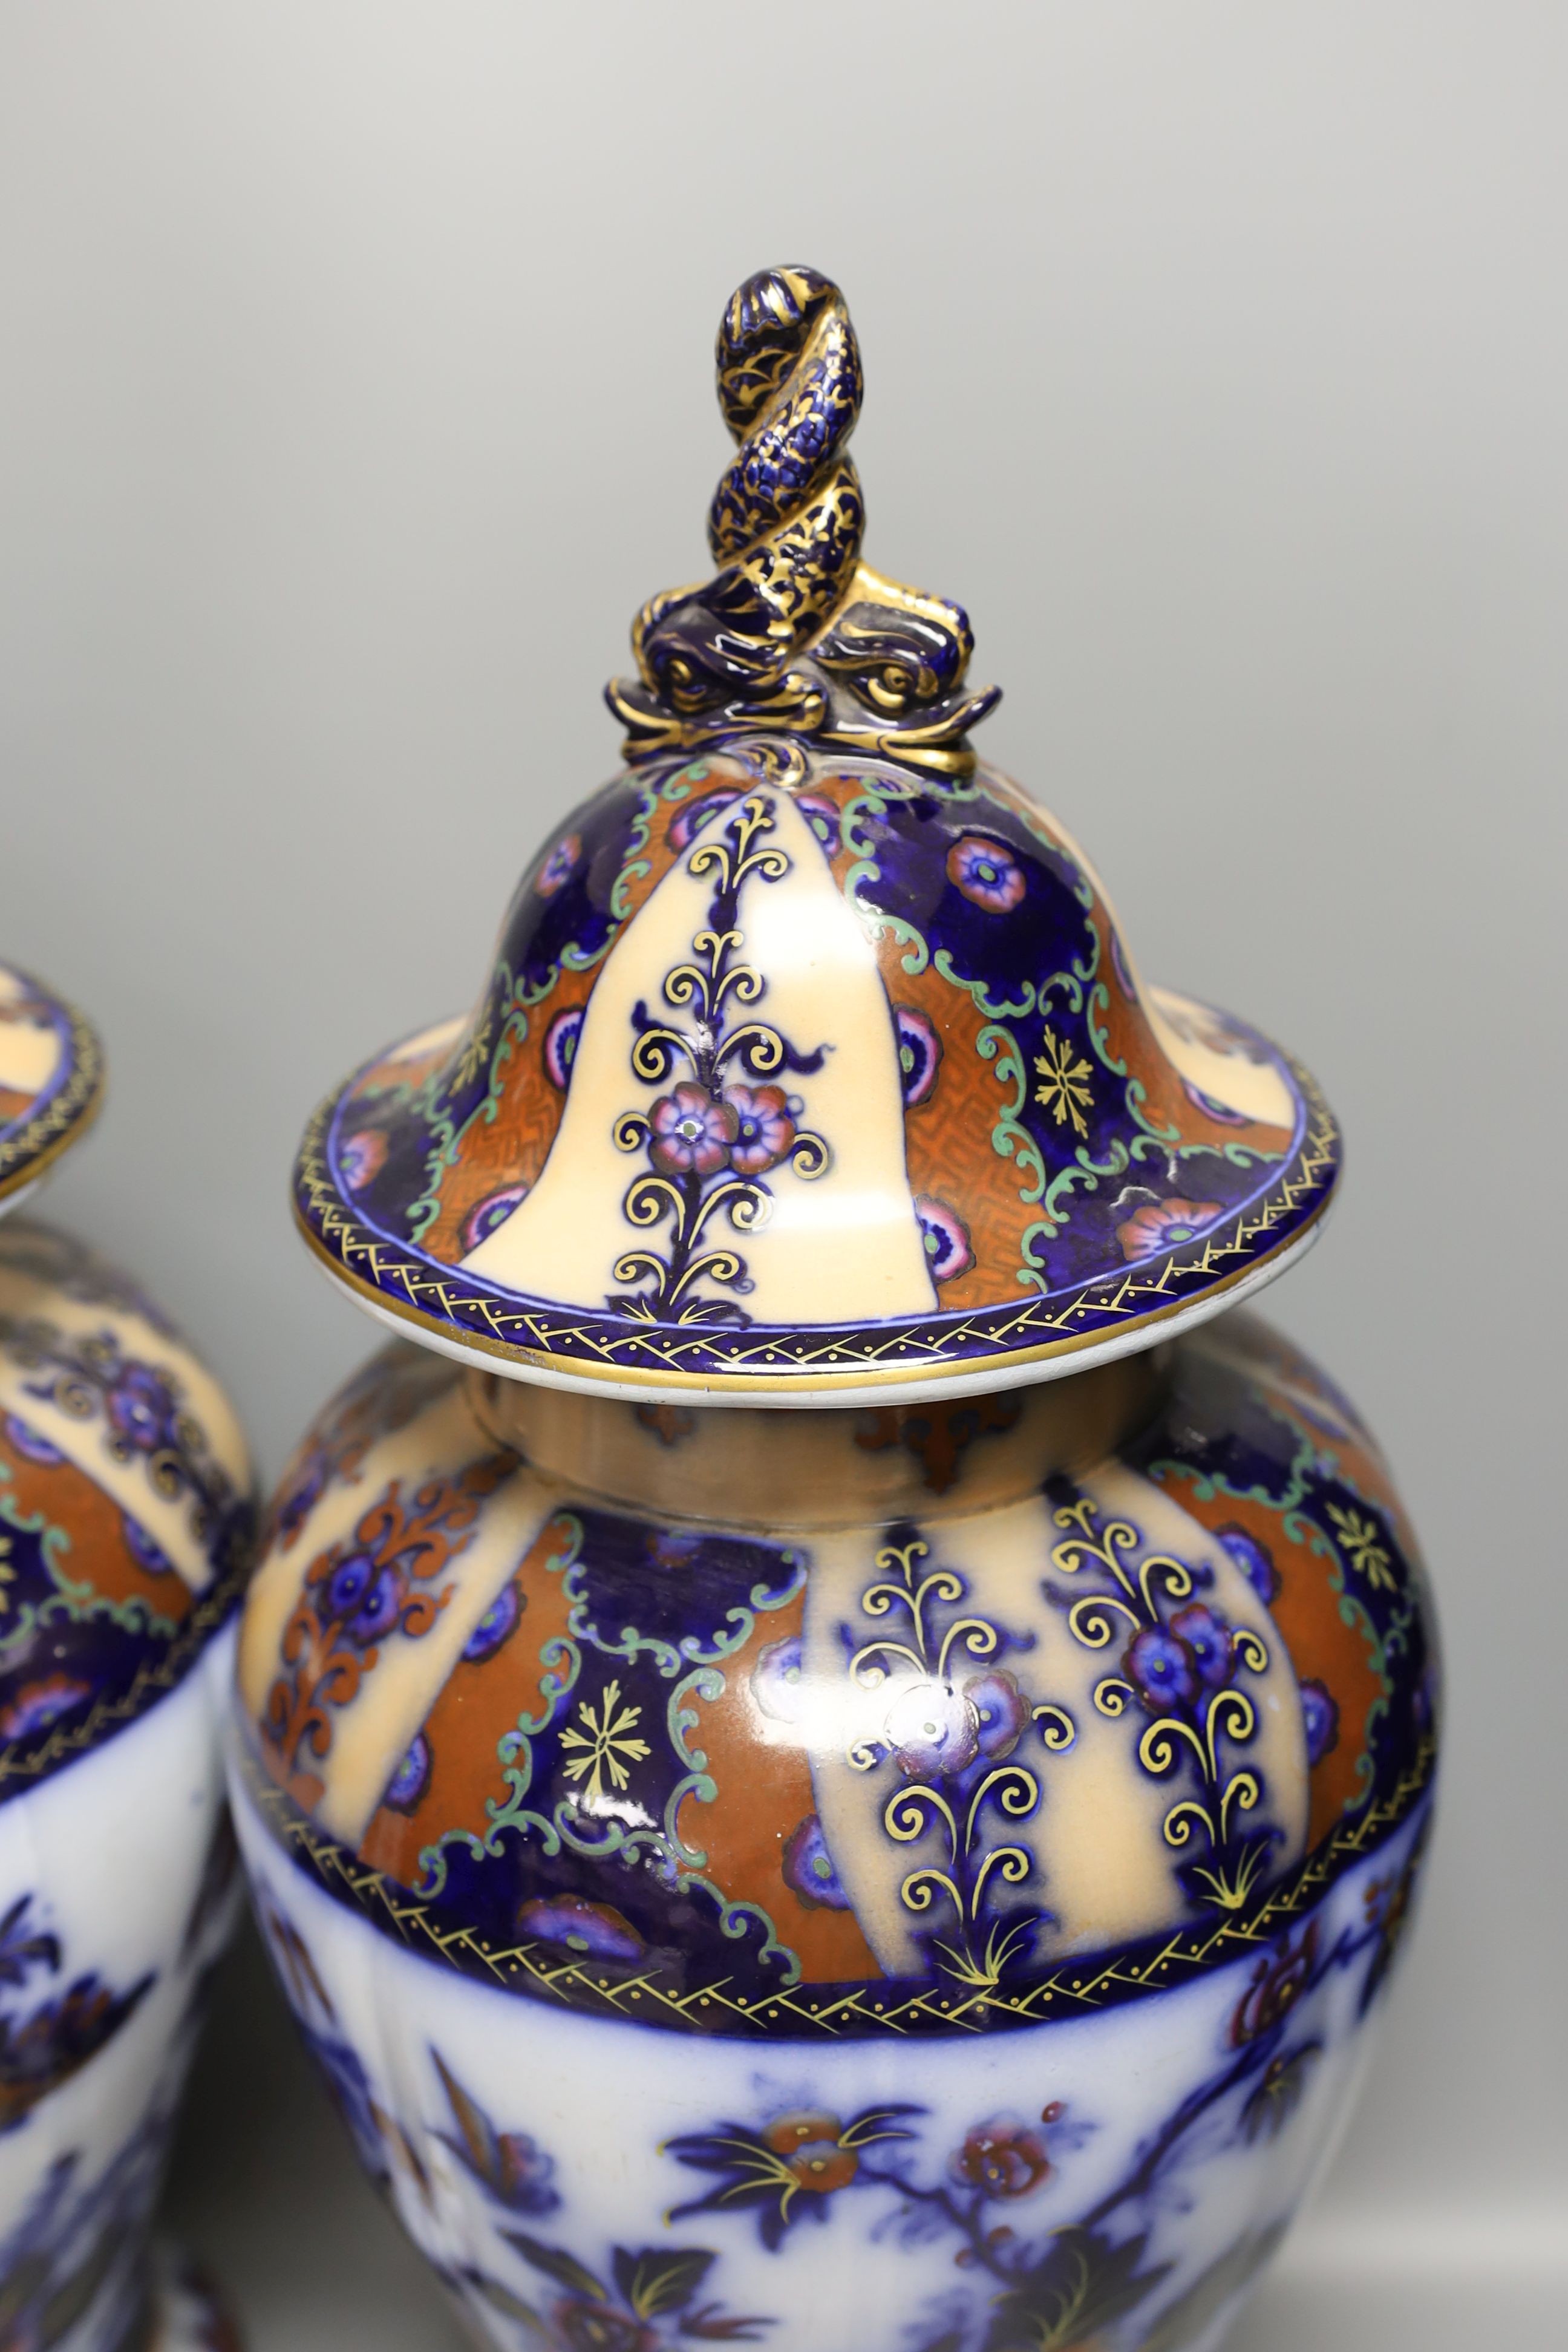 A pair of mid 19th century ironstone vases and covers - 51cm tall - Image 5 of 8